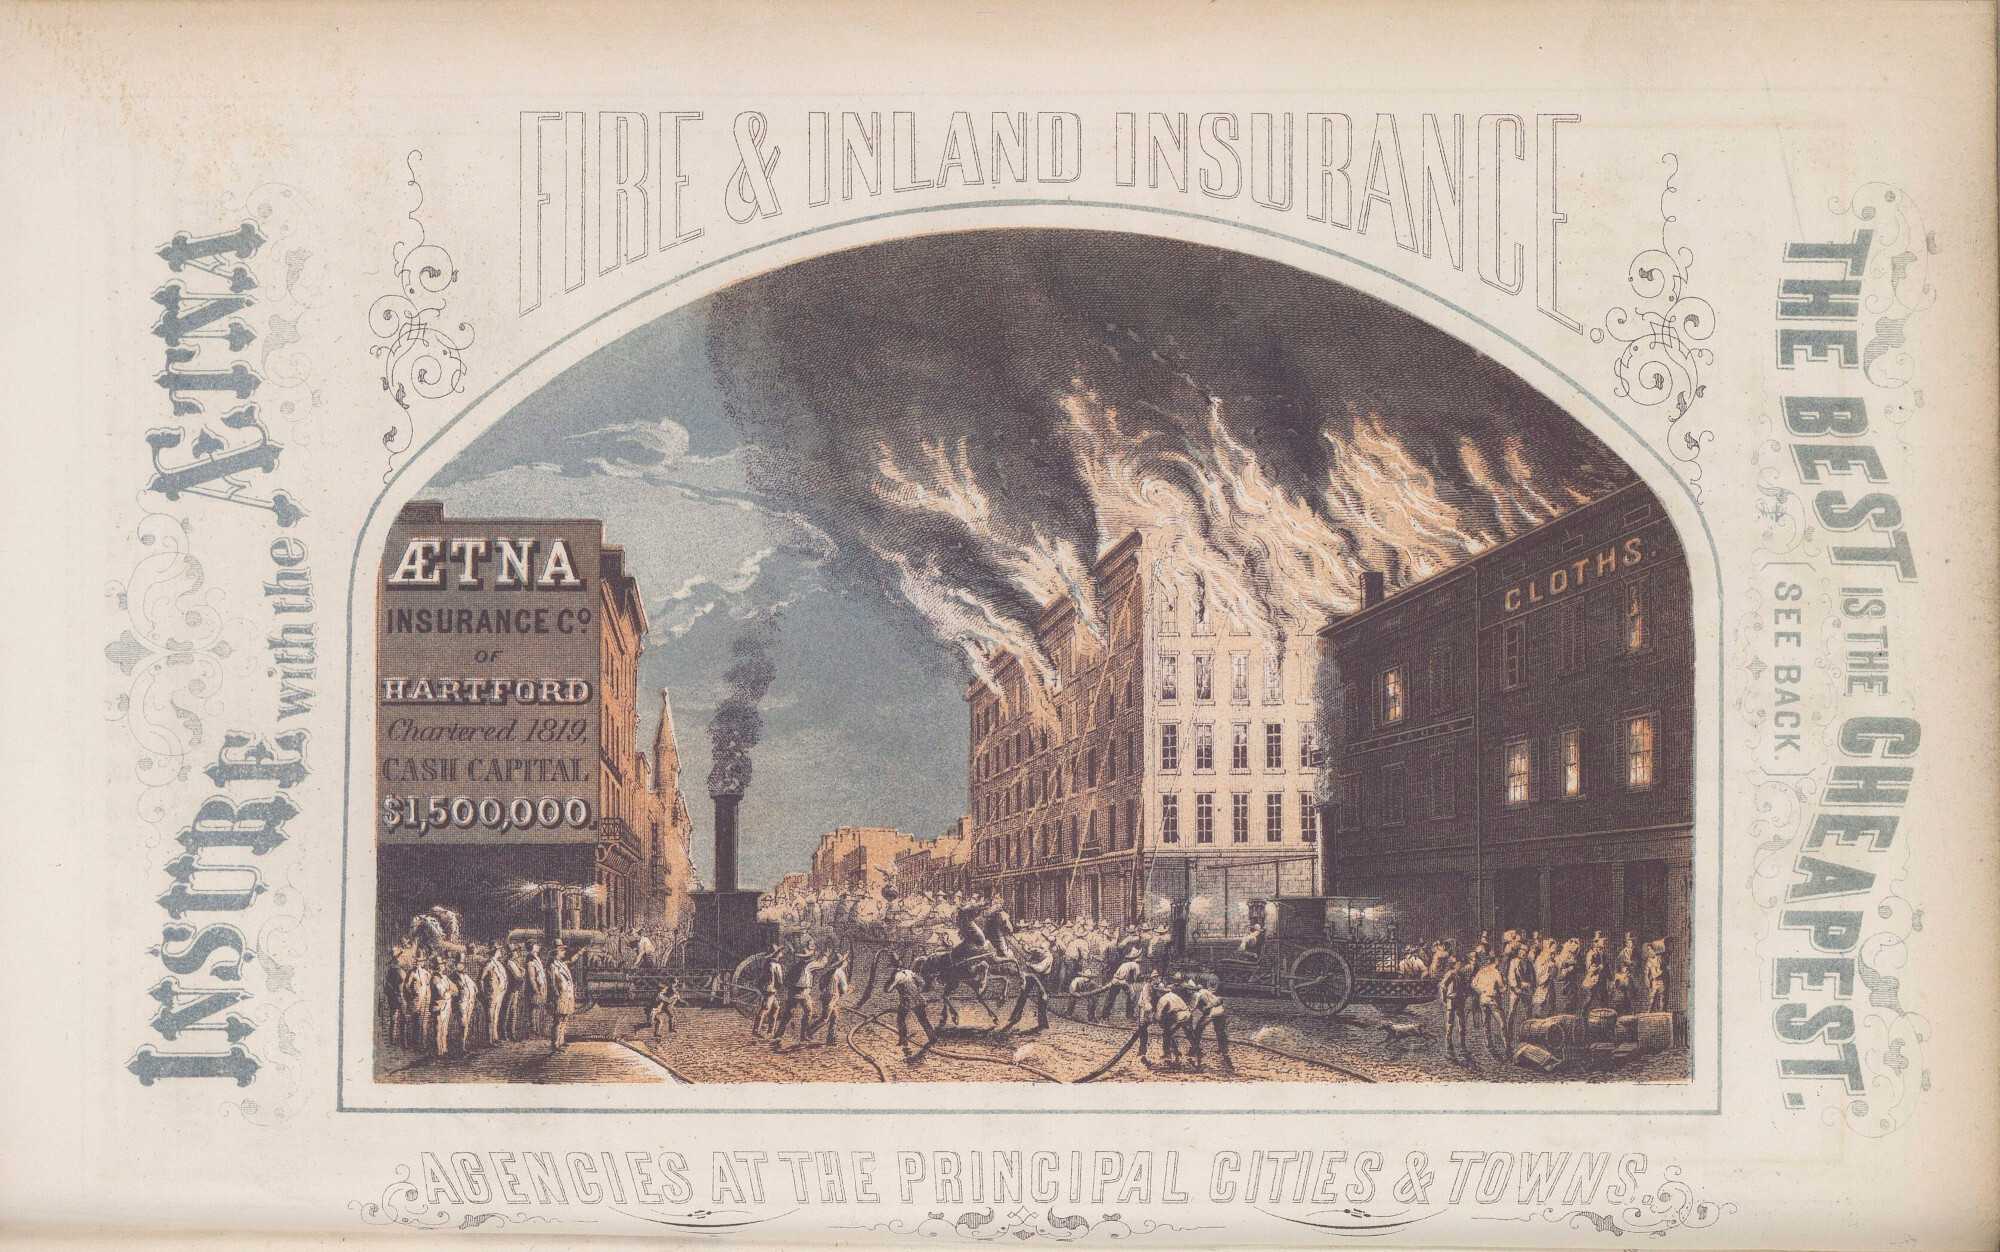 Image of Advertisement for Aetna Fire & Inland Insurance